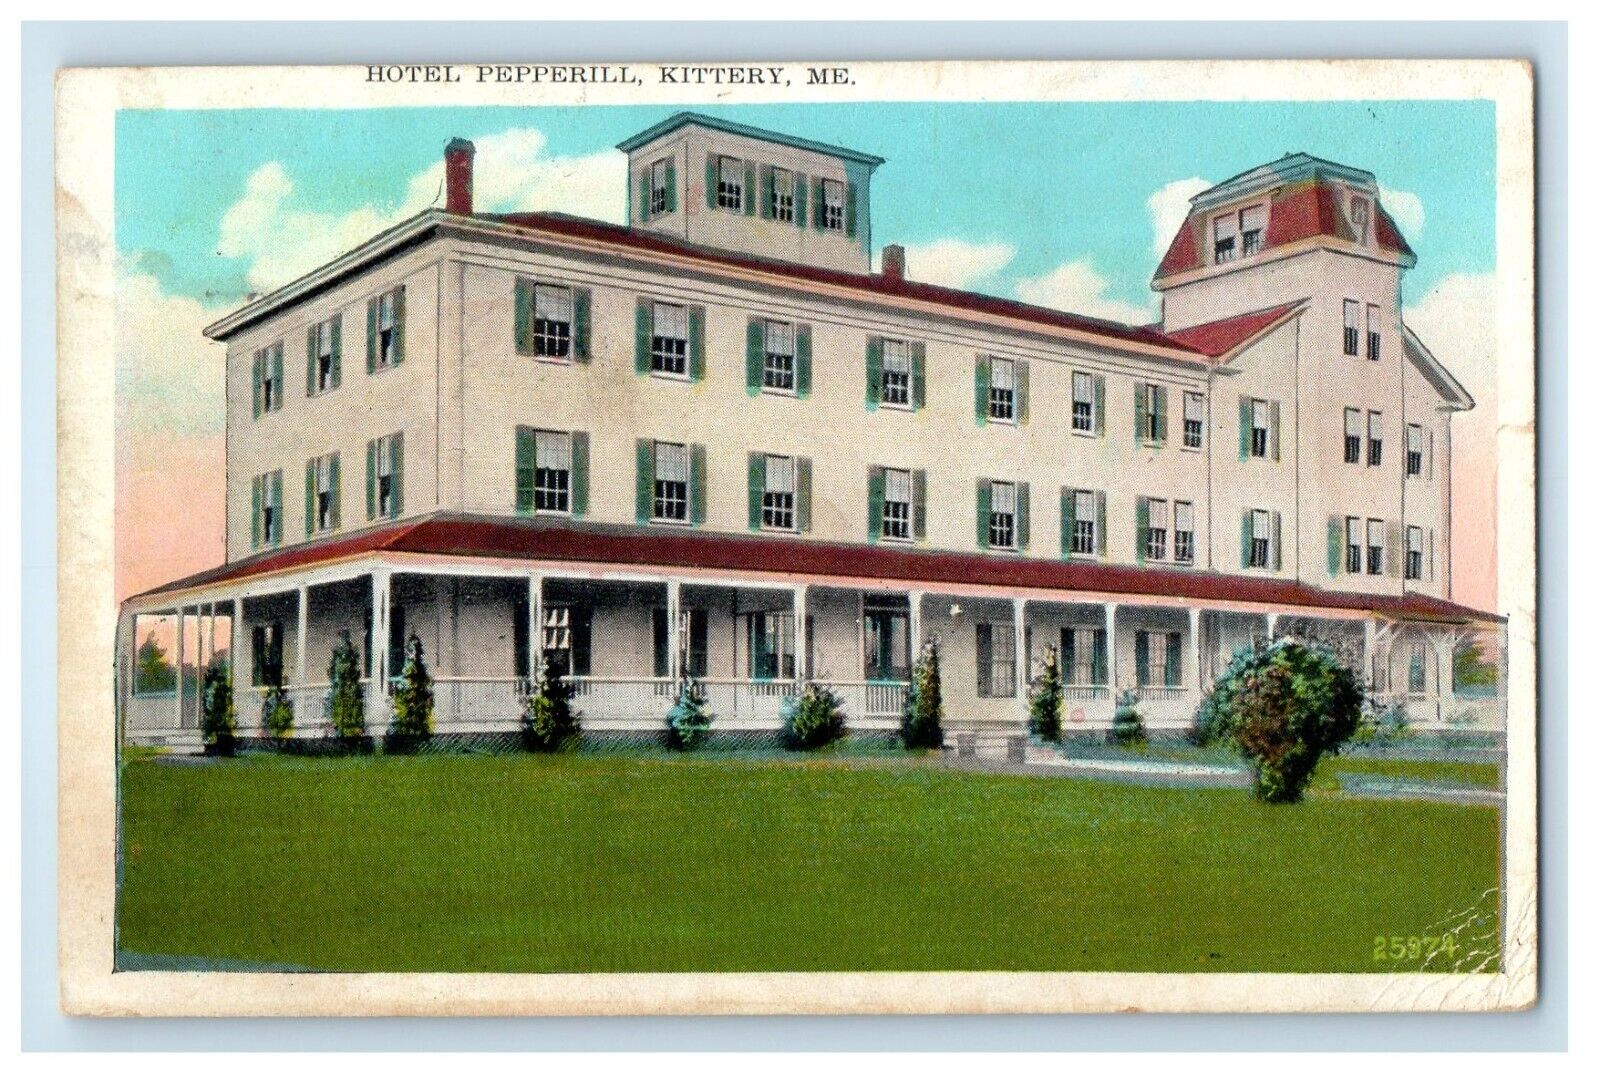 1939 View Of Hotel Pepperill Building Kittery Maine ME Posted Vintage Postcard